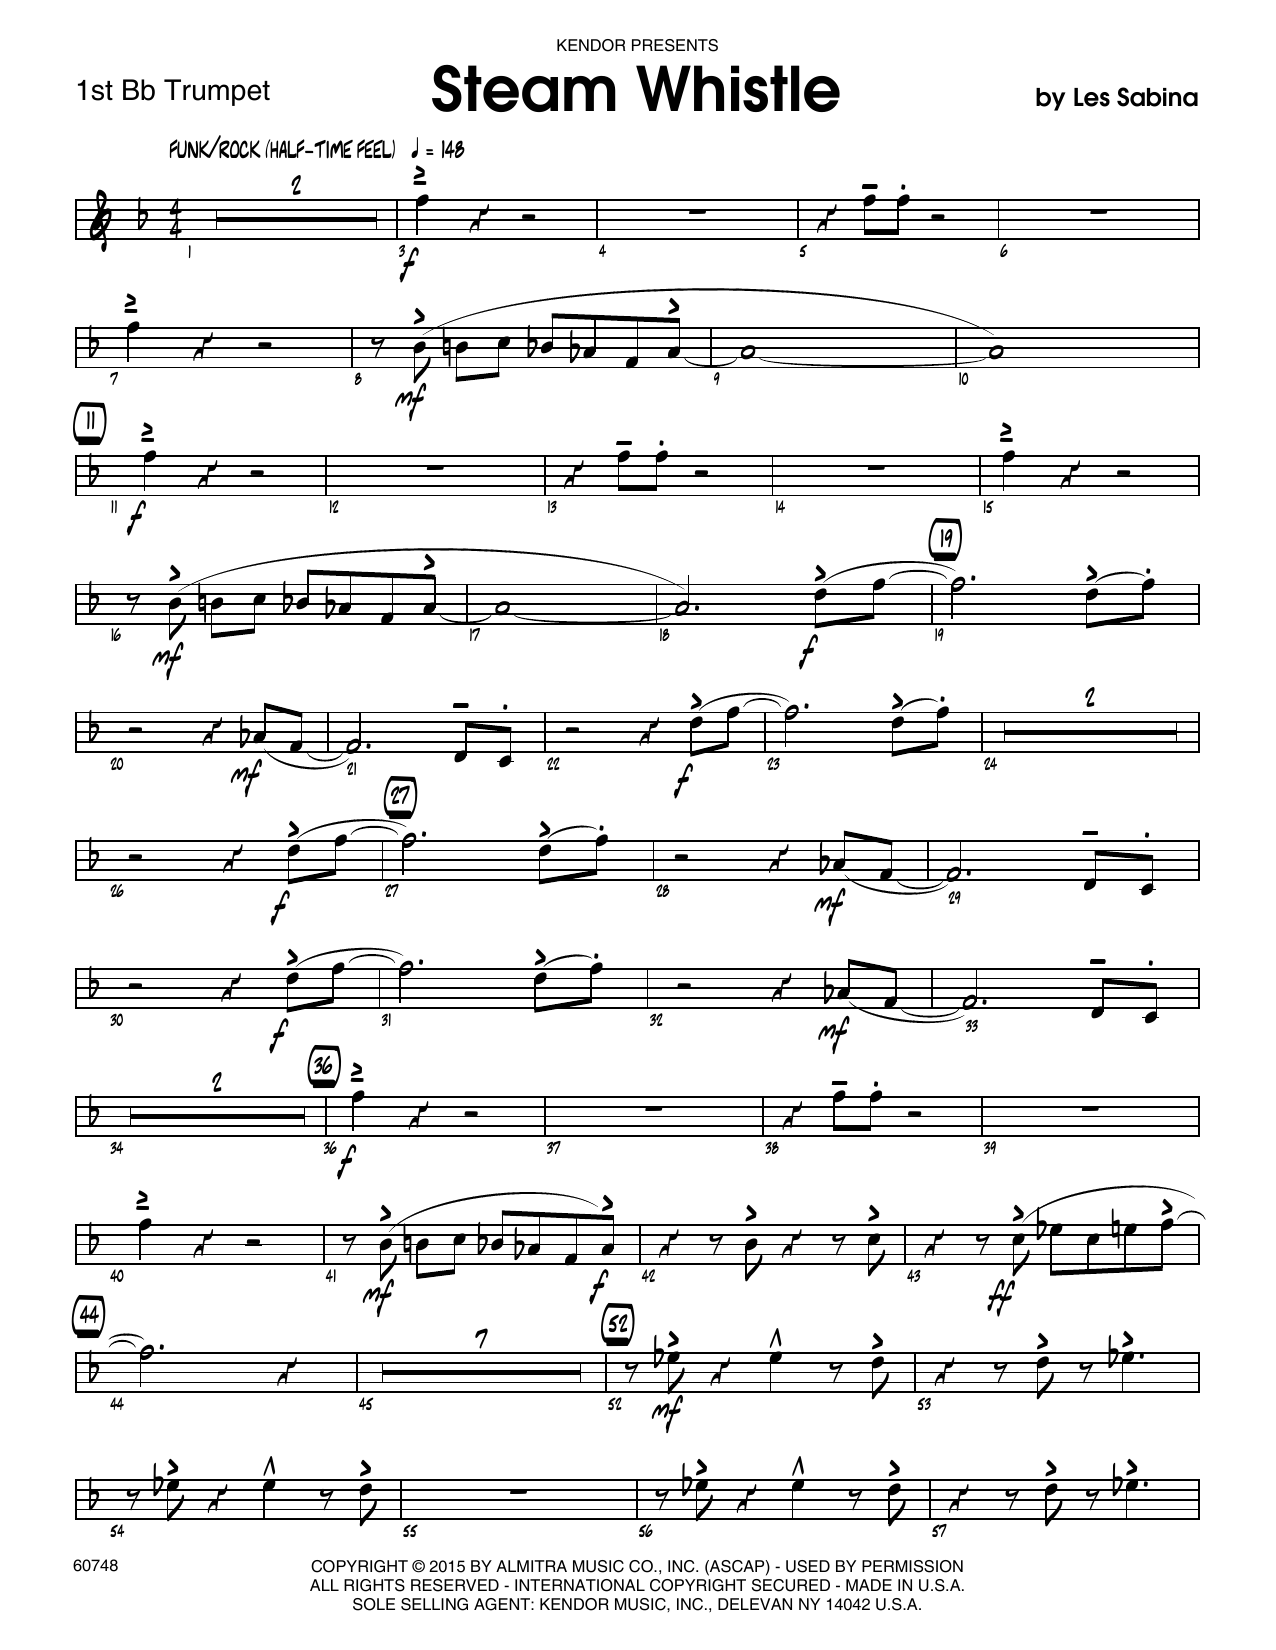 Download Les Sabina Steam Whistle - 1st Bb Trumpet Sheet Music